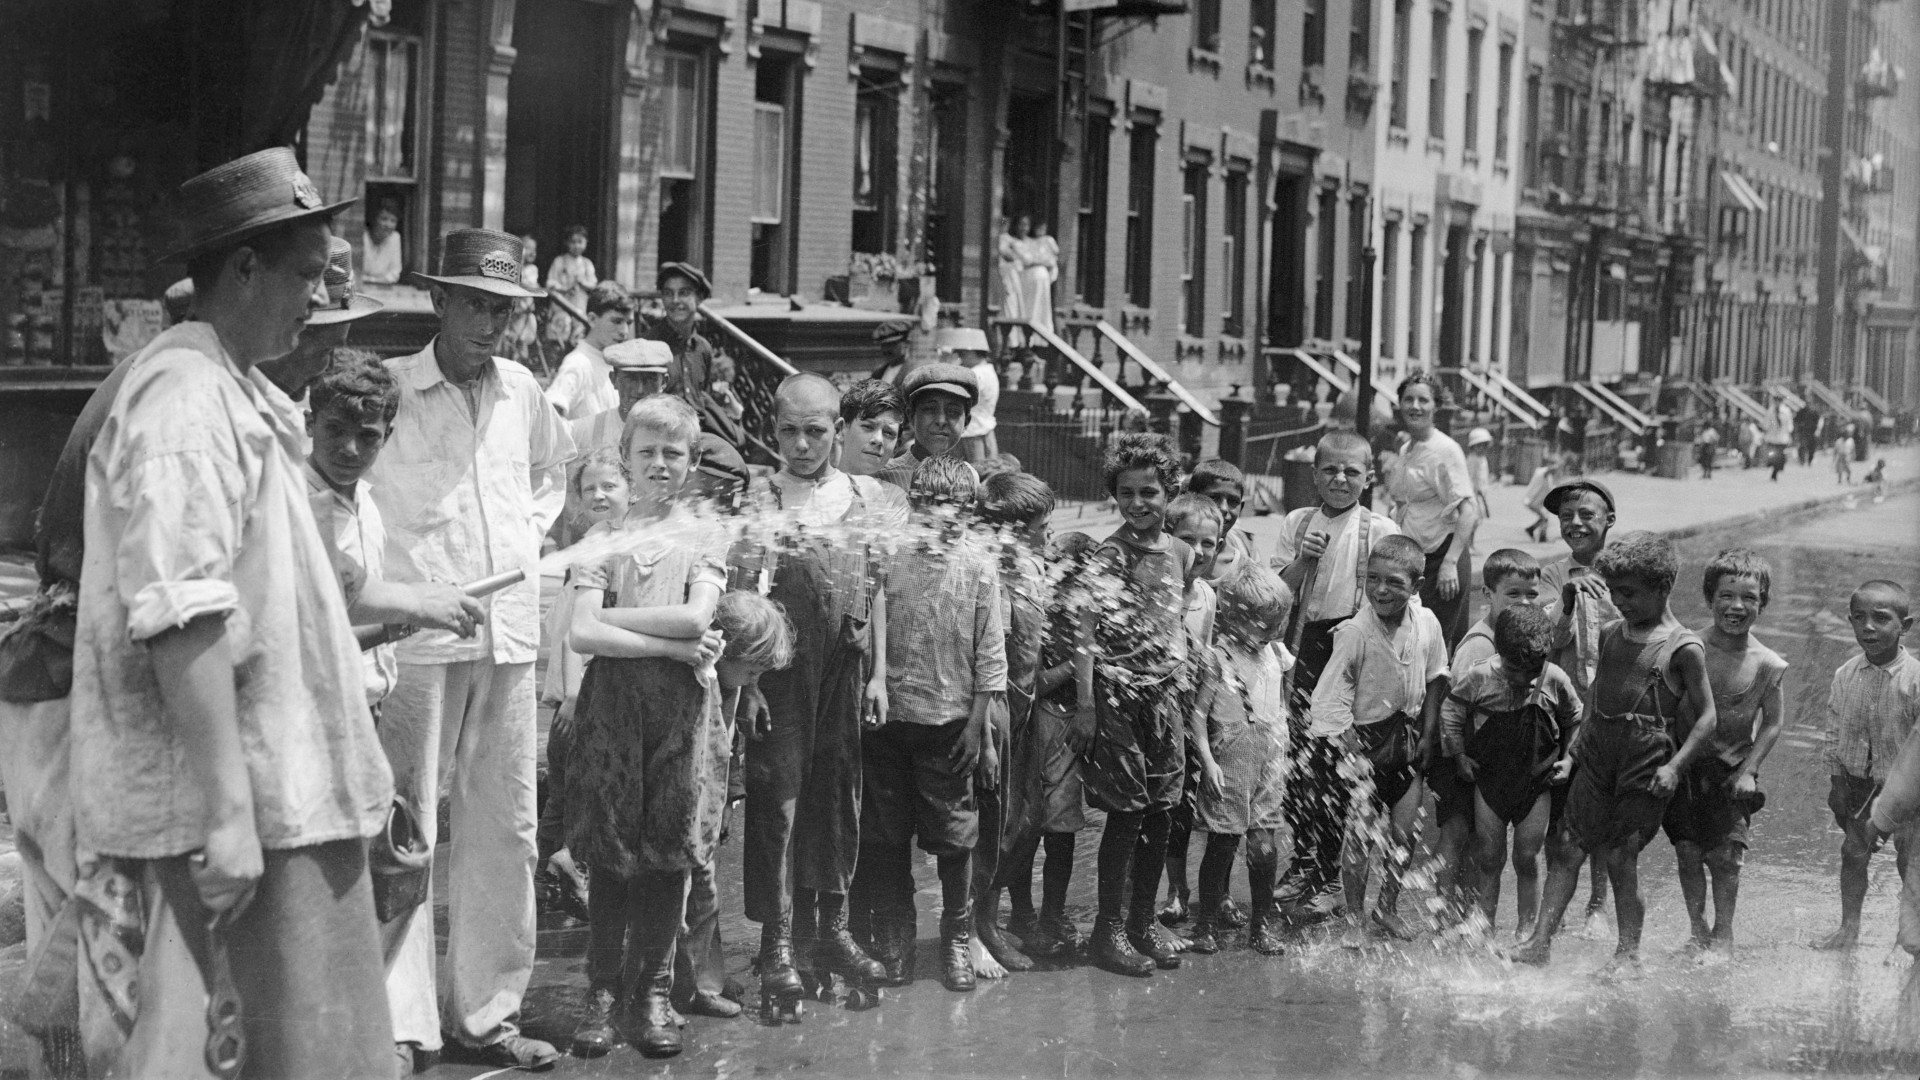 A street flusher tries to keep kids cool in New York on of the hottest days in 1915